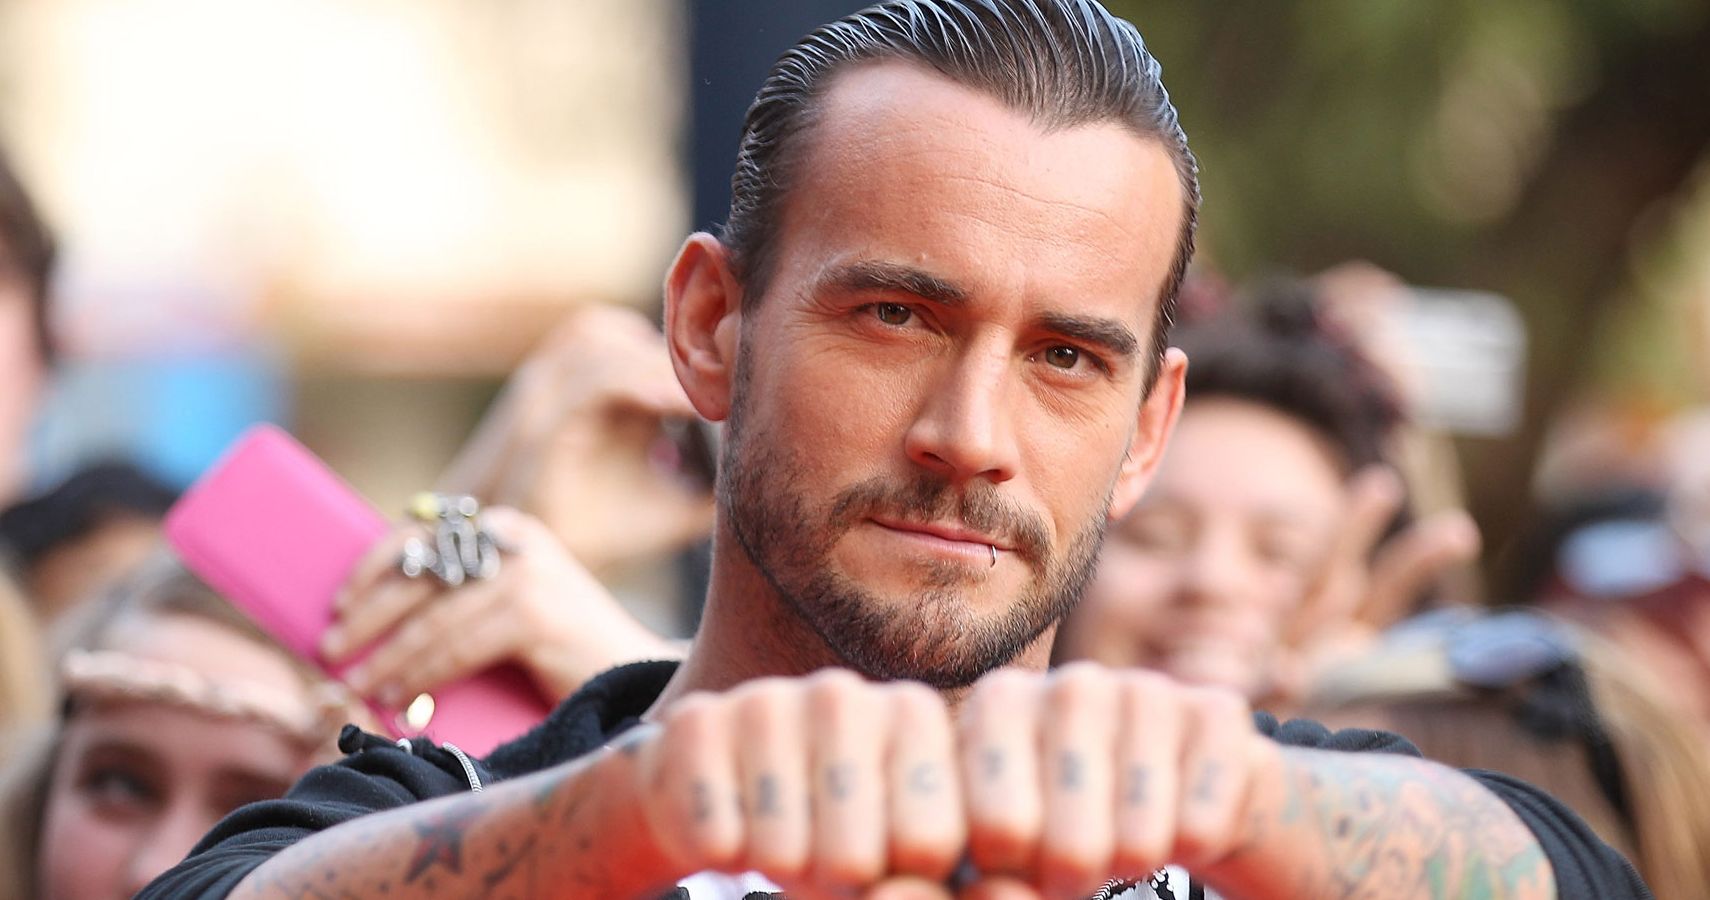 Cm Punk 5 Reasons We Re Excited For His Return To Fox 5 Why We Re Not